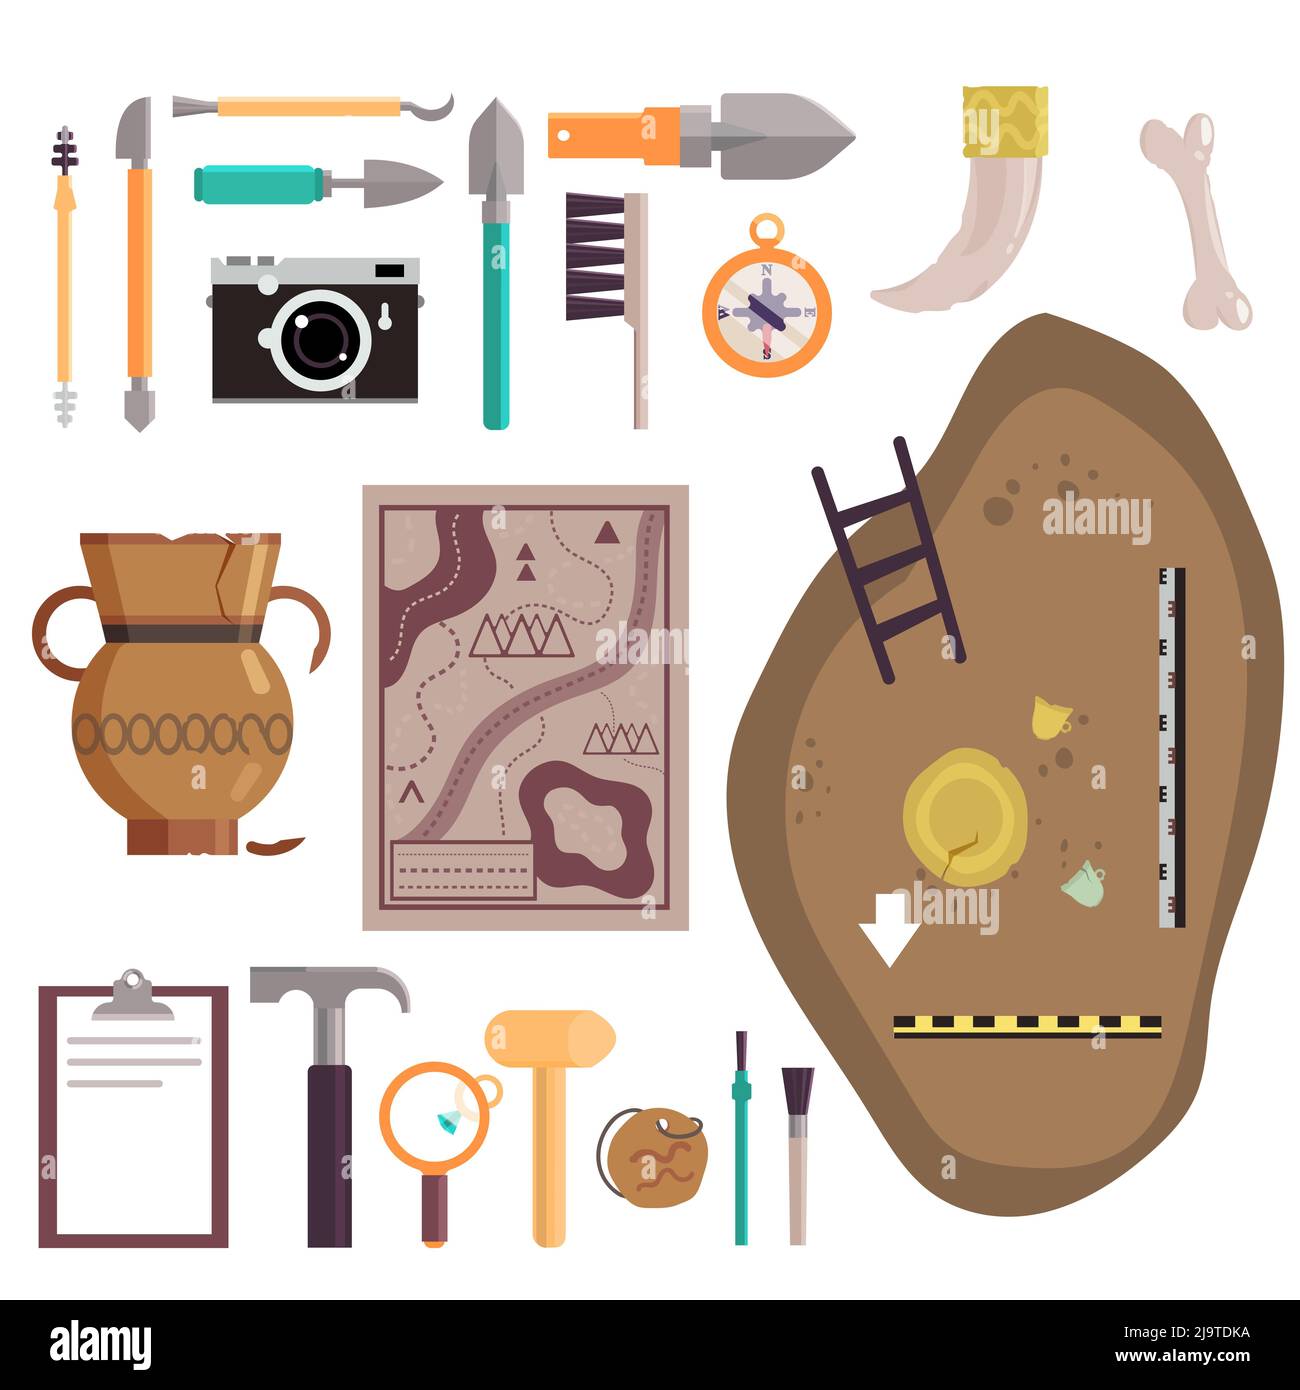 Archaeology icon set. Vector illustration of archaeological site, ancient artifacts, archaeological tools isolated on white background. Stock Vector